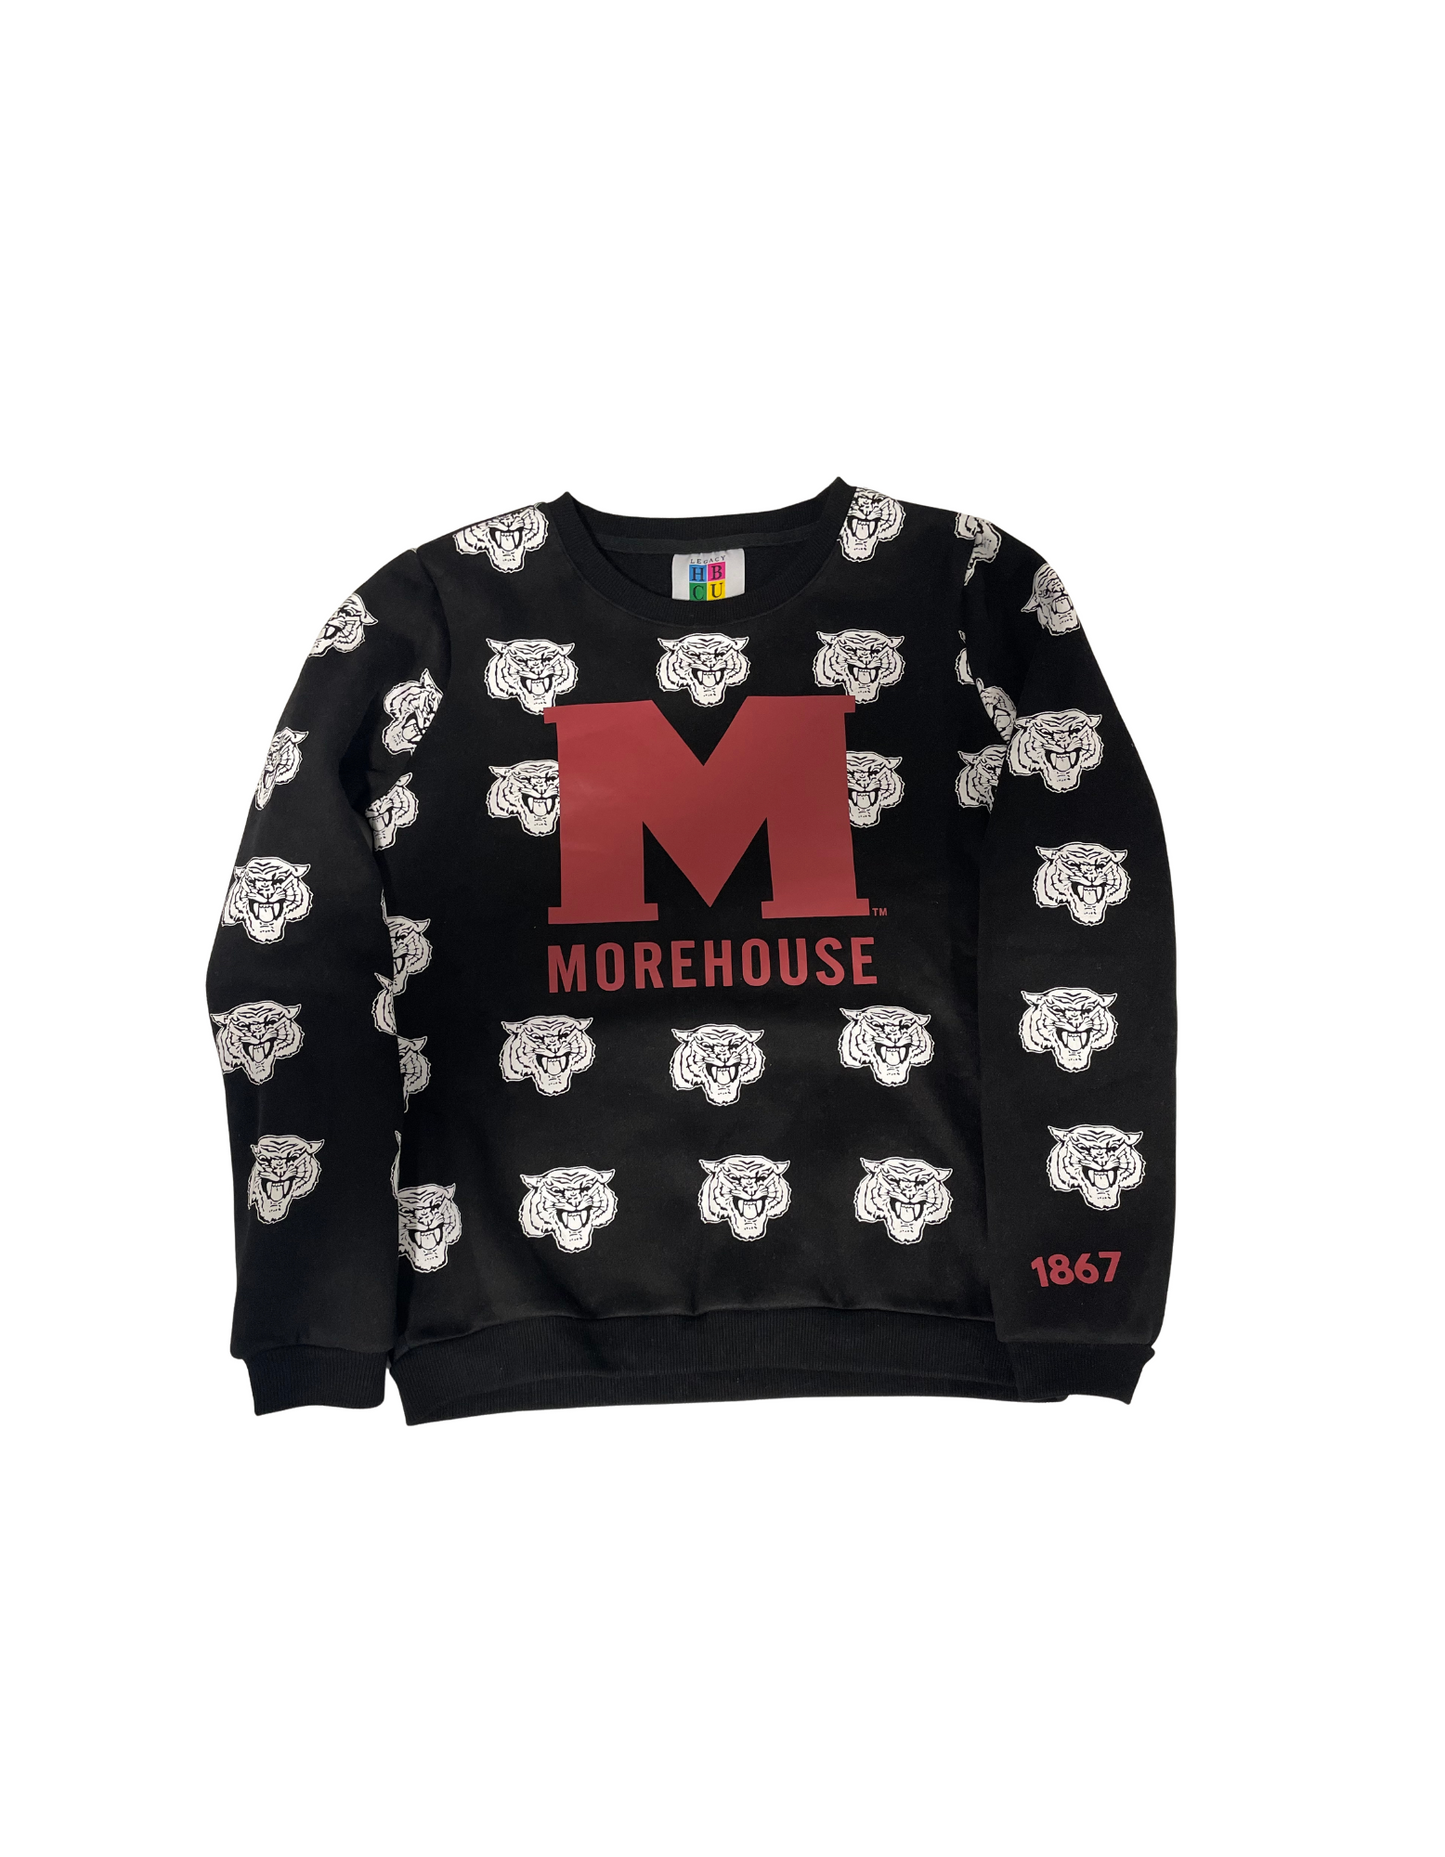 Morehouse Tigers Youth Crewneck